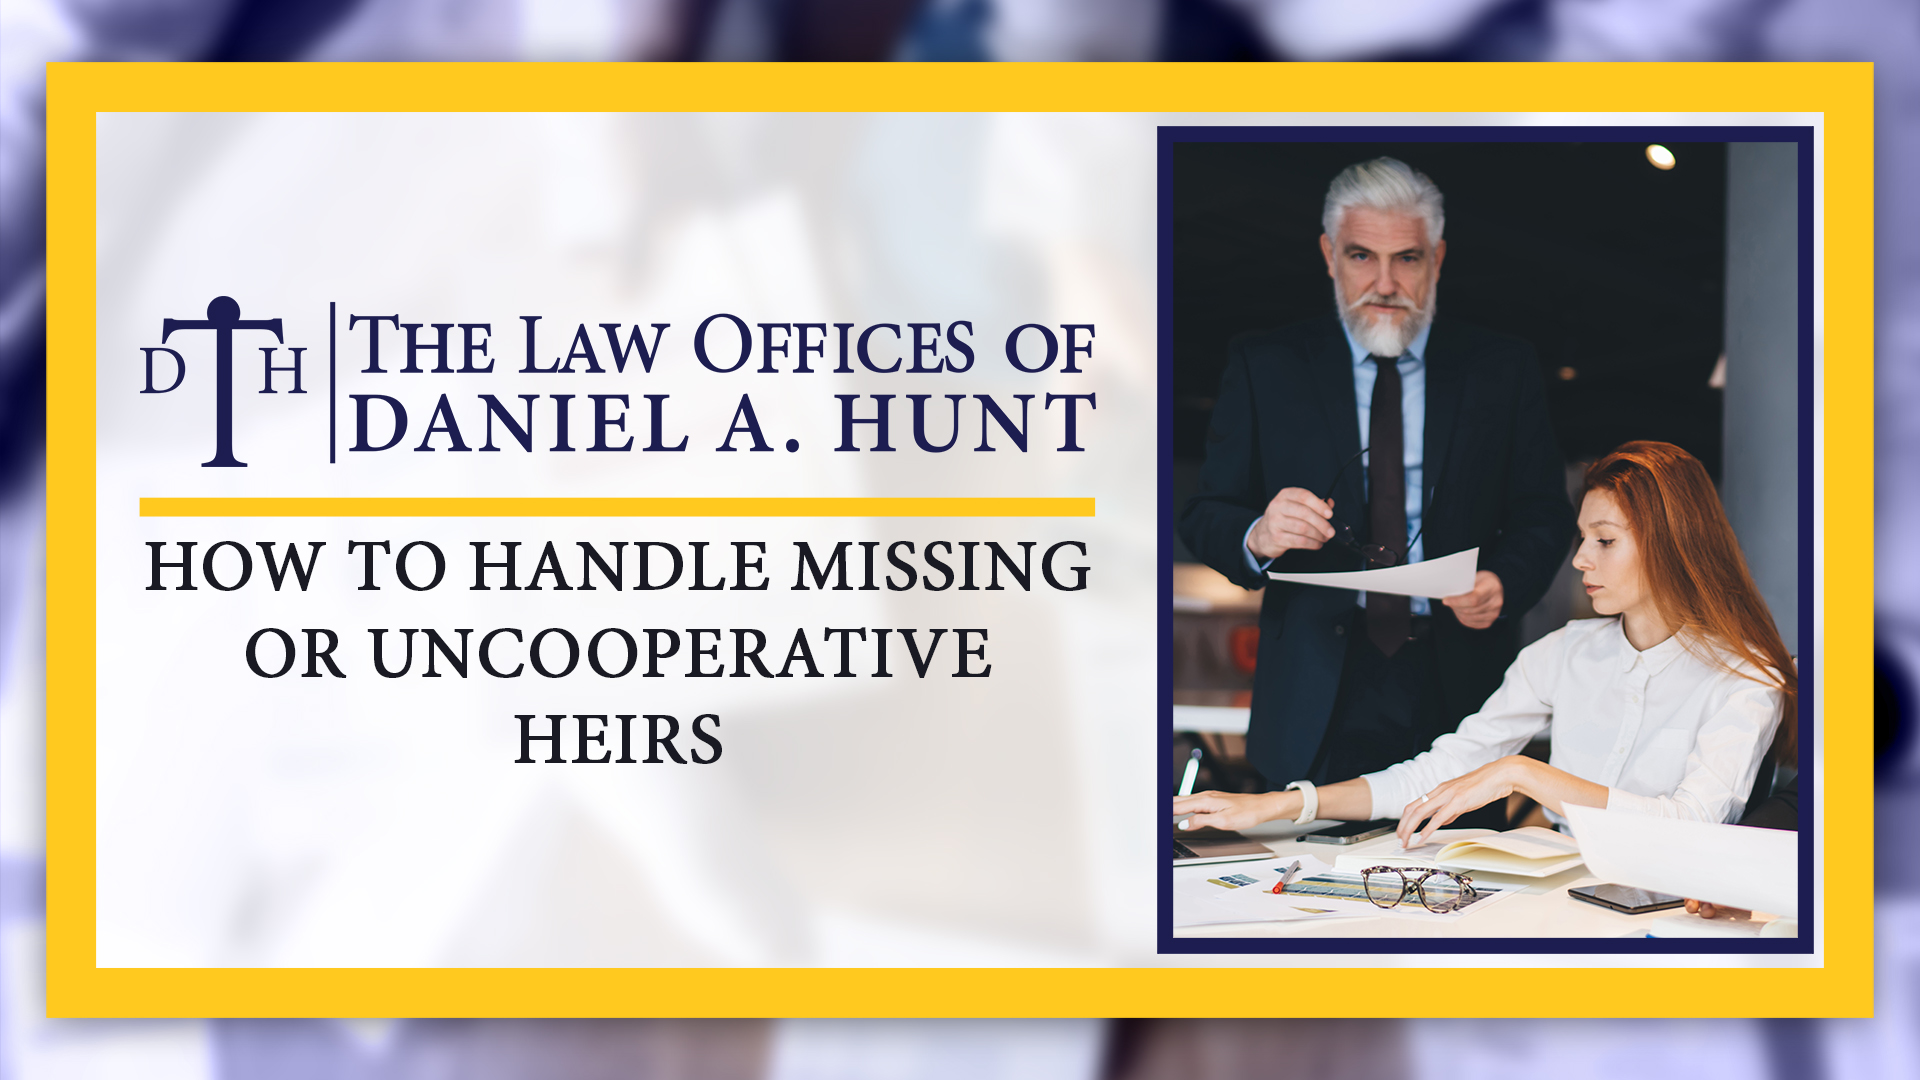 How to Handle Missing or Uncooperative Heirs